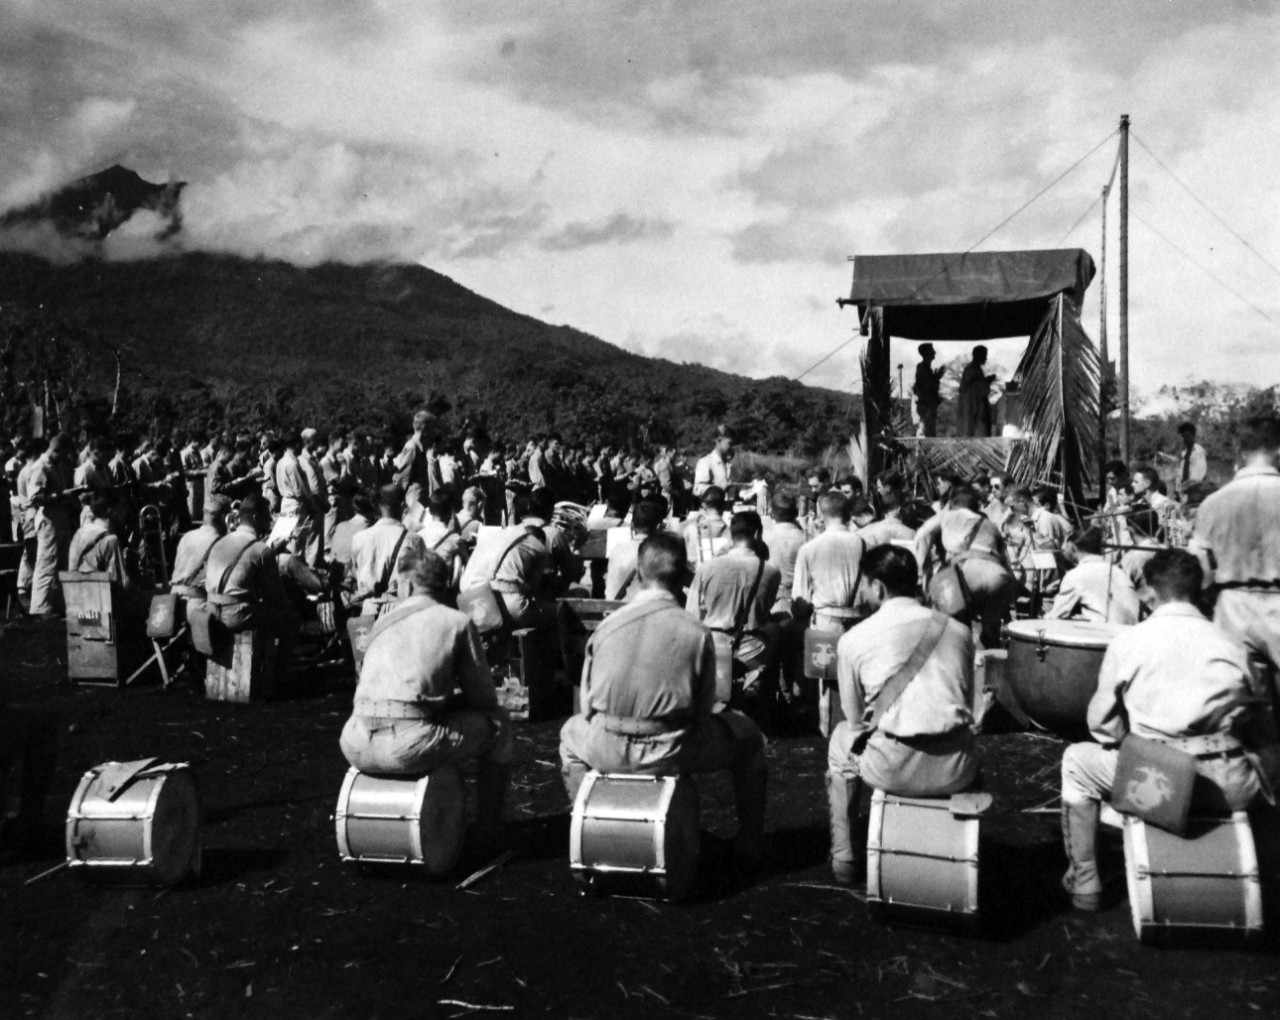 127-GW-983-83832: Battle of Cape Gloucester, New Britain, December 1943-January 1944.   “Easter Sunday on New Britain”  A Marine military band takes the place of an organ for Easter Sunday Mass held on Cape Gloucester, New Britain.  Photographed by Howard, 9 April 1944.   Official U.S. Marine Corps Photograph, now in the collections of the National Archives.   (2014/7/9).